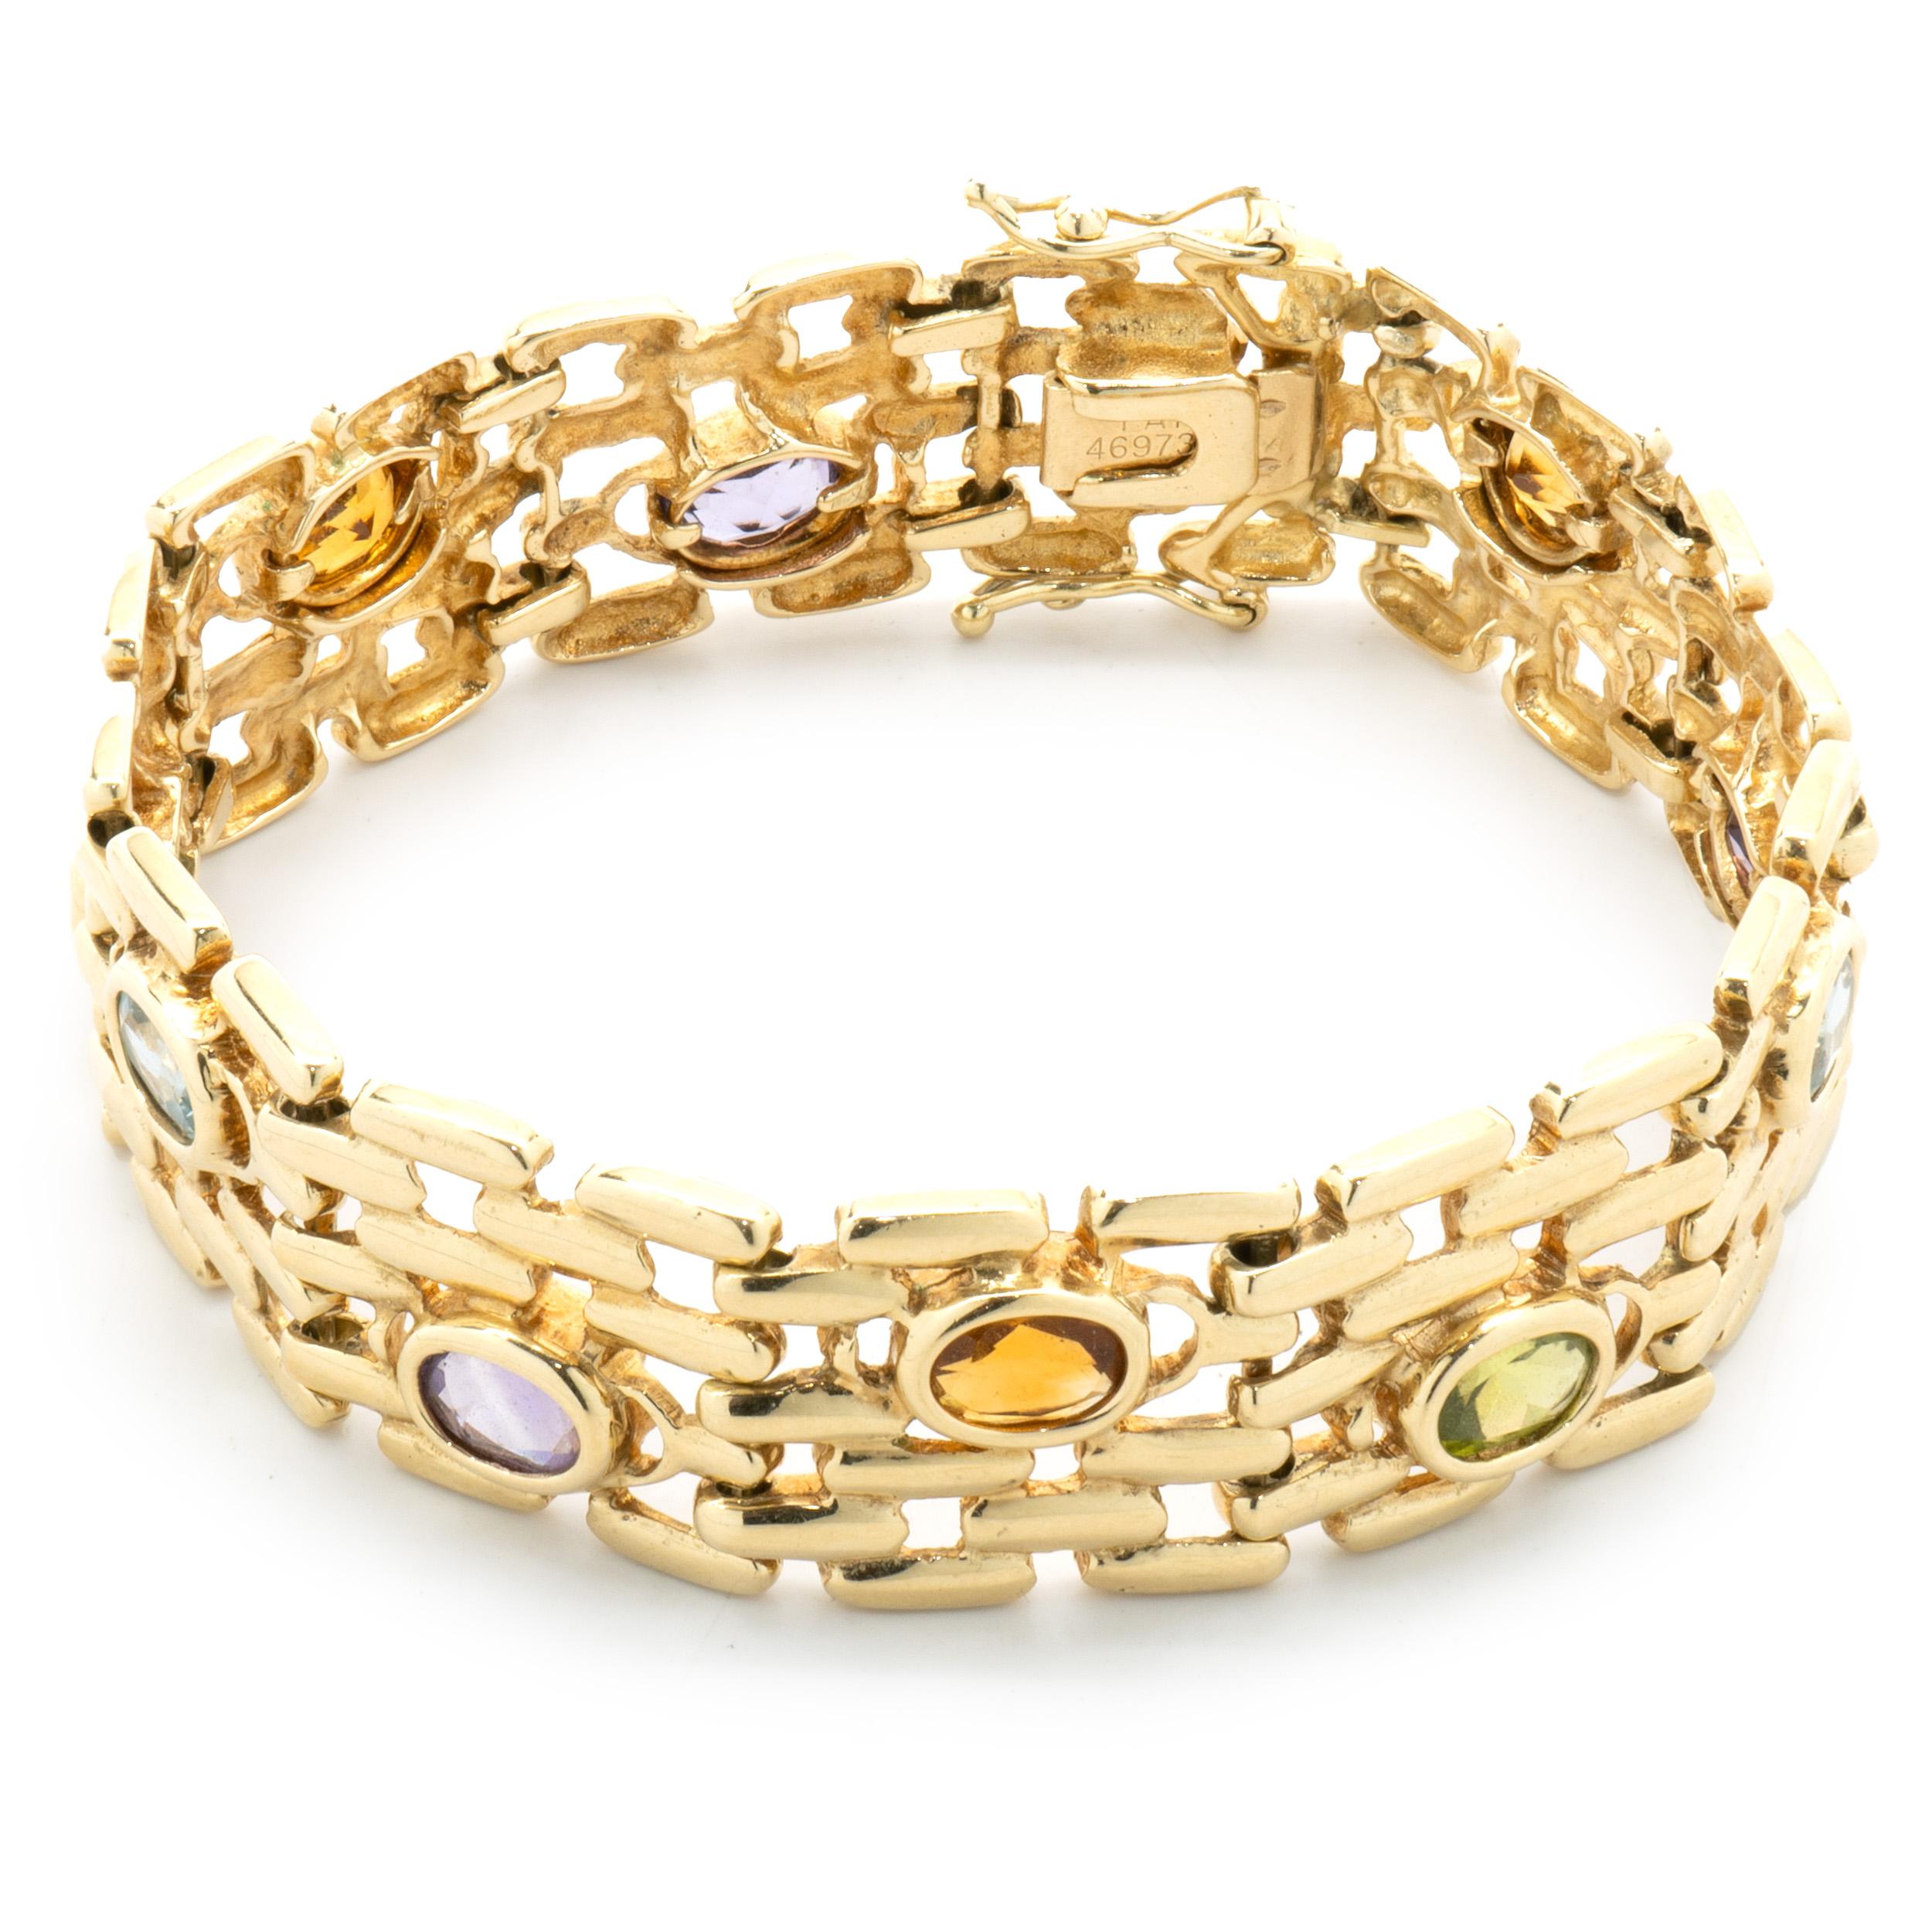 Designer: custom
Material: 14K yellow gold
Weight:  33.31 grams
Dimensions: bracelet will fit up to a 7-inch wrist